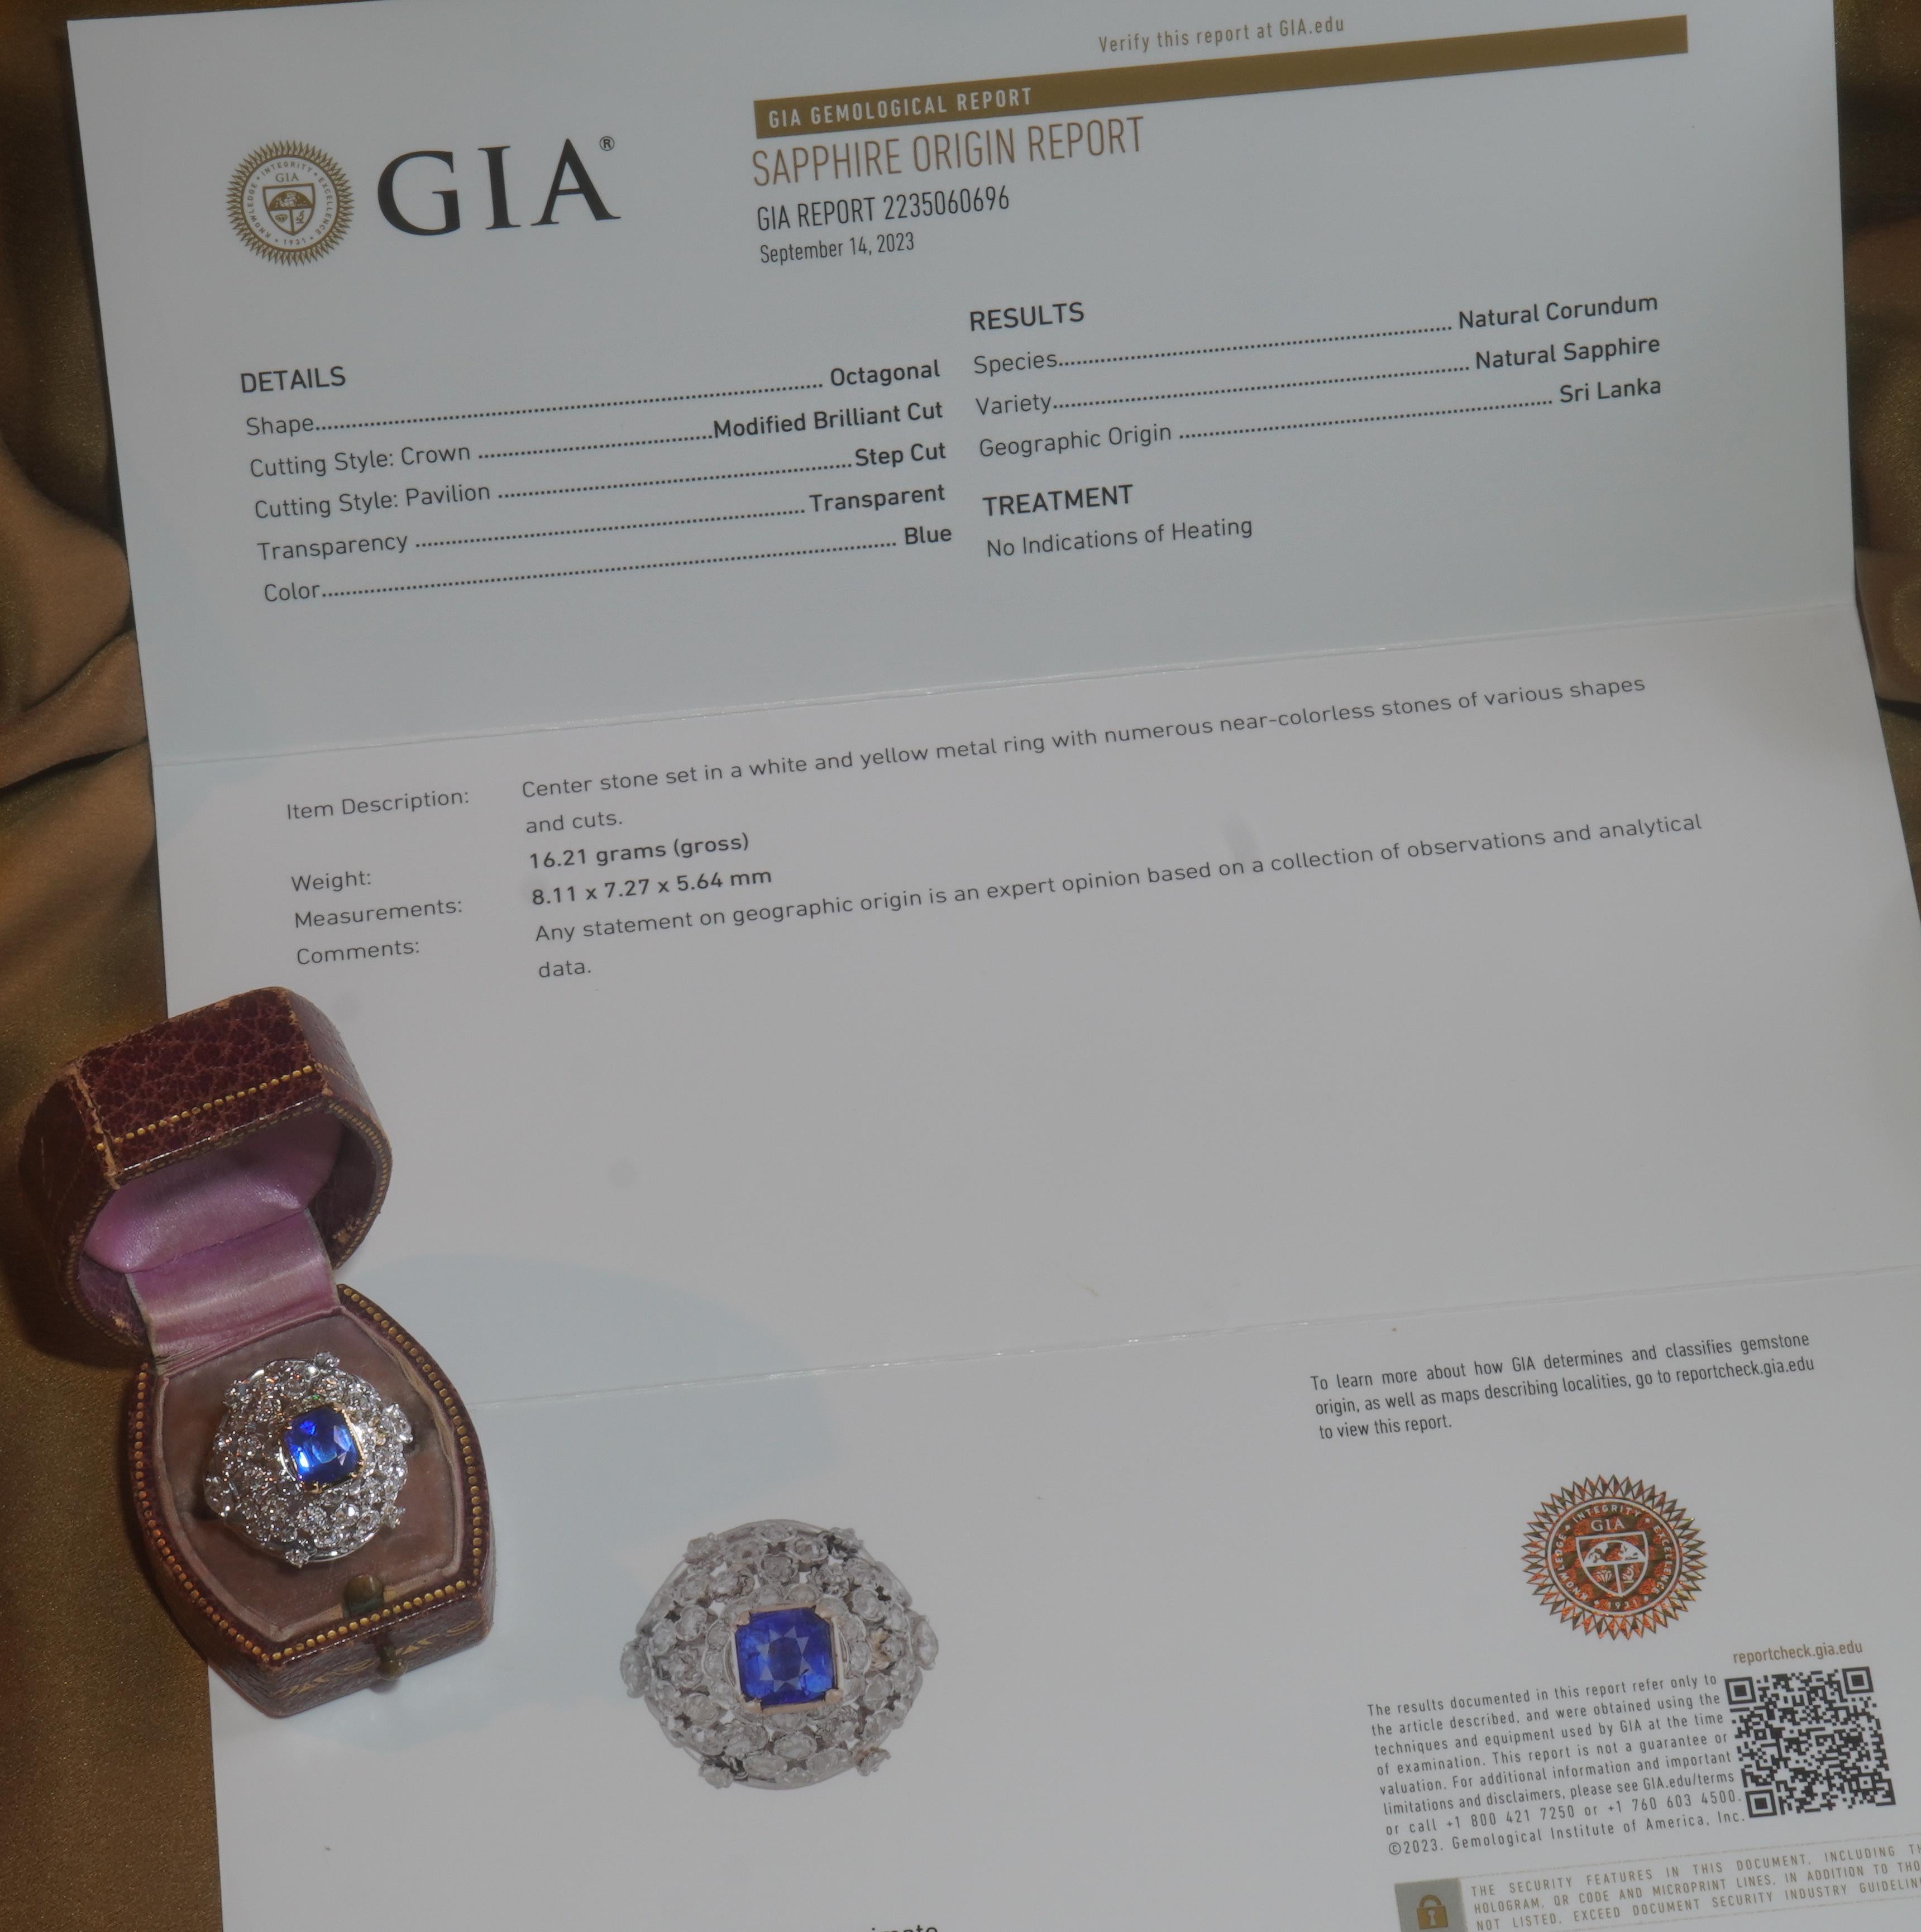 Old South Jewels proudly presents...VINTAGE LUXURY... GIA CERTIFIED PLATINUM & 18K 8.27 CARAT UNHEATED SAPPHIRE DIAMOND VINTAGE RING AND BOX.   4.95 CARAT TRANSPARENT BLUE GIA CERTIFIED RARE NO HEAT NATURAL CEYLON SAPPHIRE.   (This Gorgeous Vintage